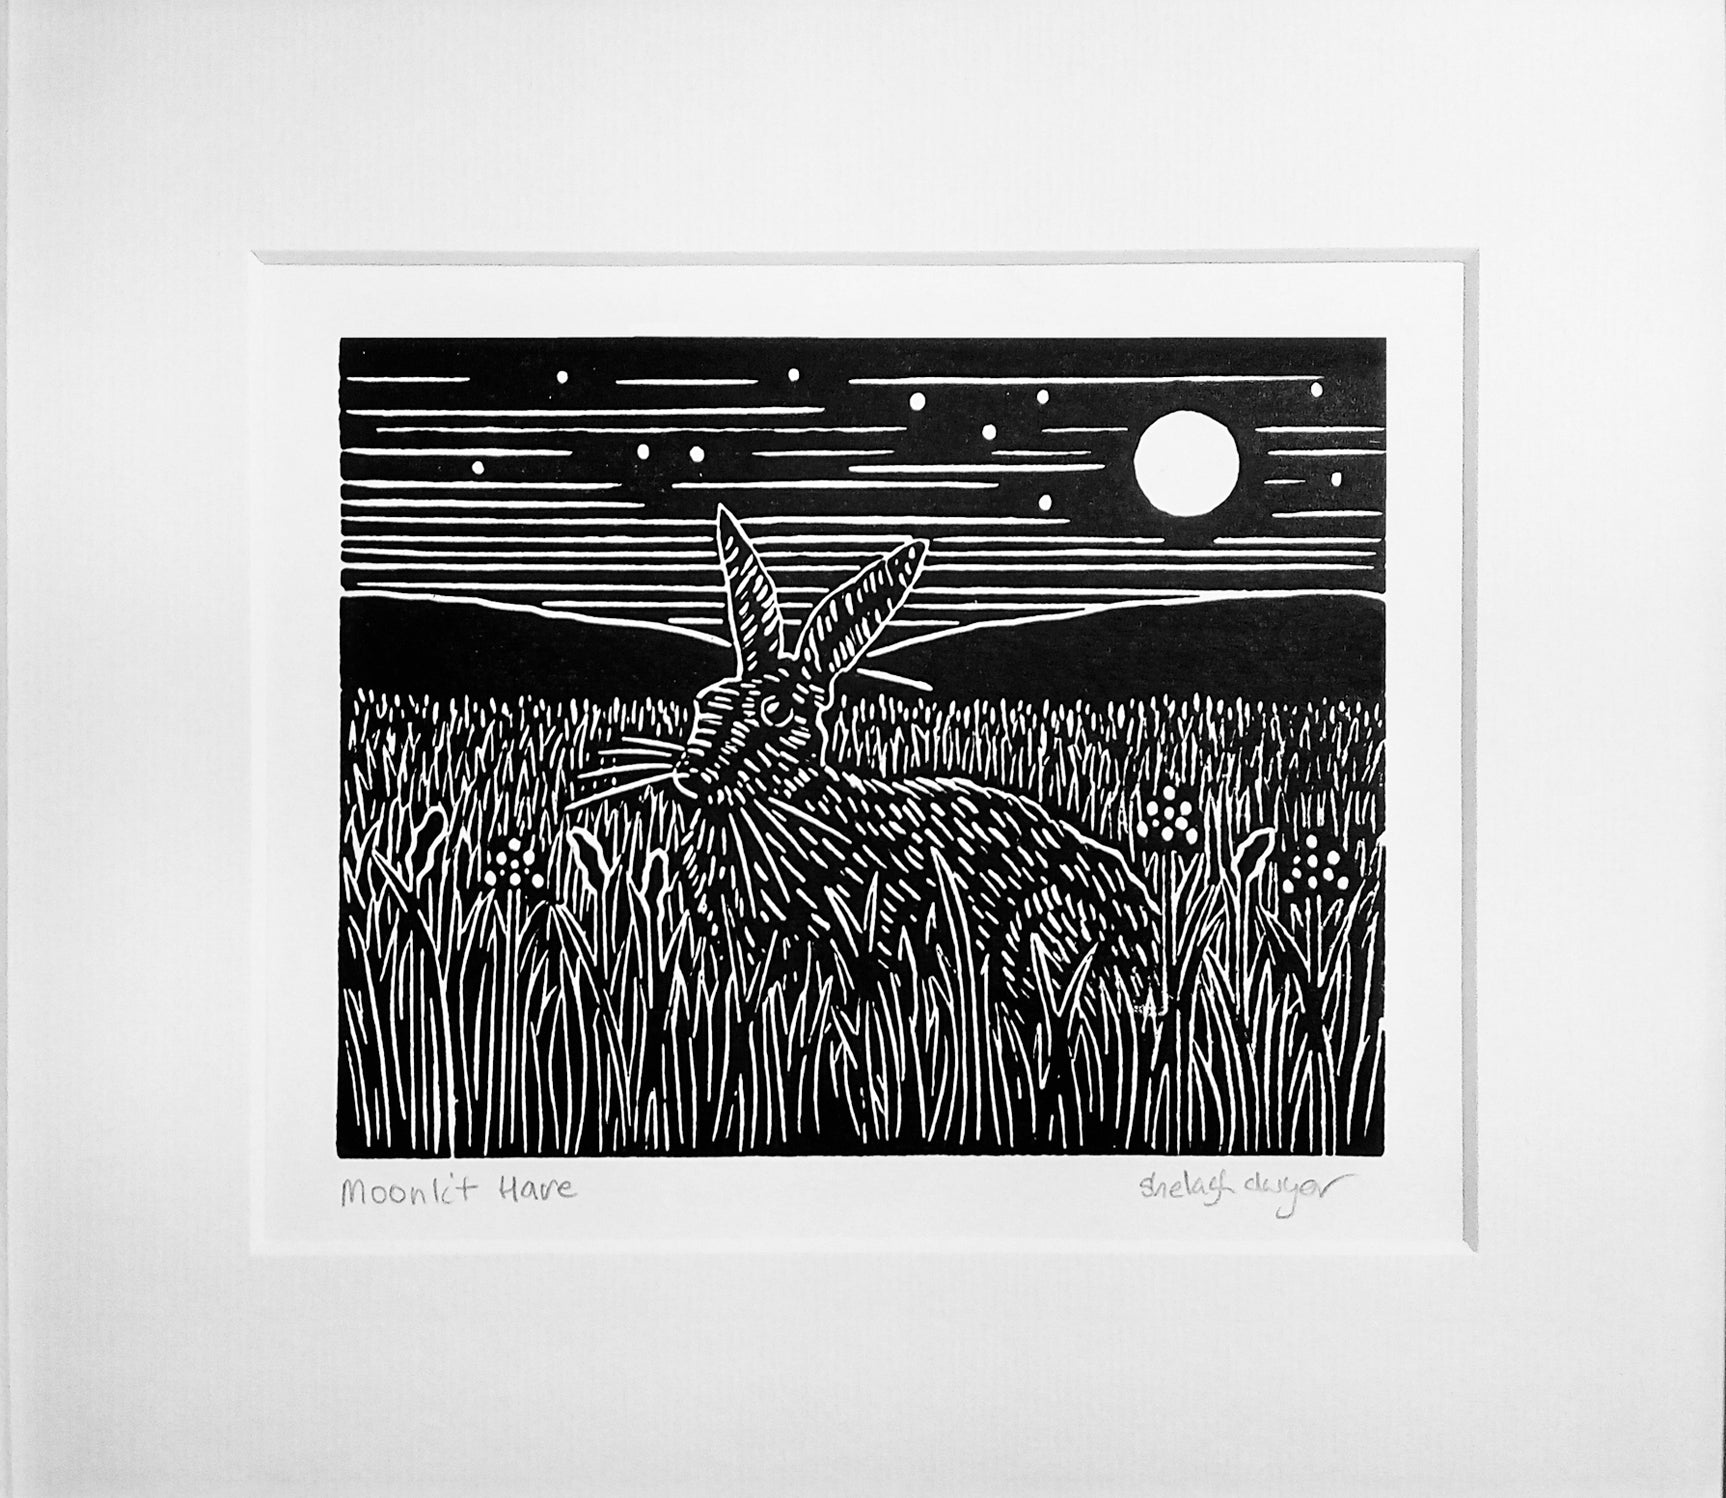 Mounted lino print in black ink of alert hare sitting on grass under starry moonlit sky